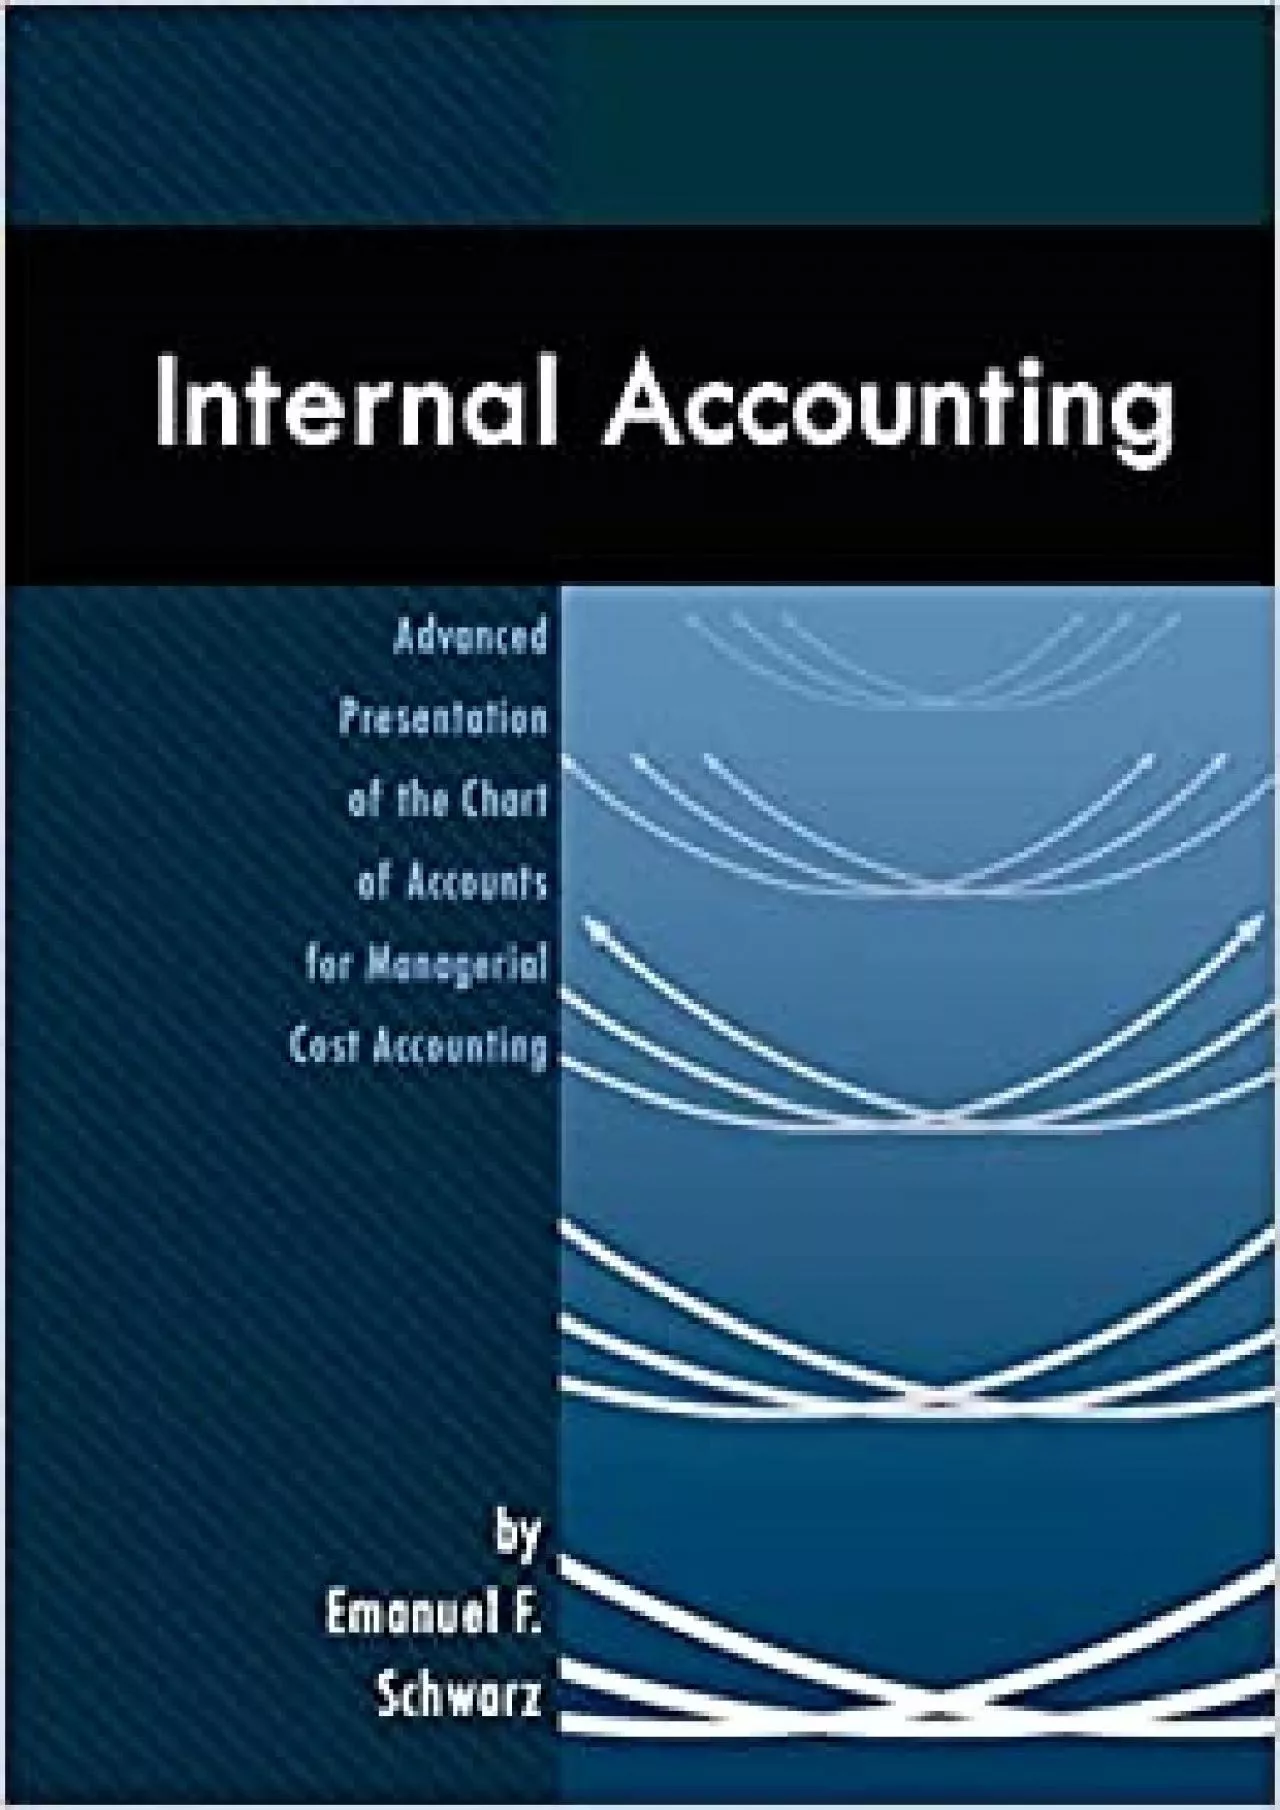 Internal Accounting: Advanced Presentation of the Chart of Accounts for Managerial Cost